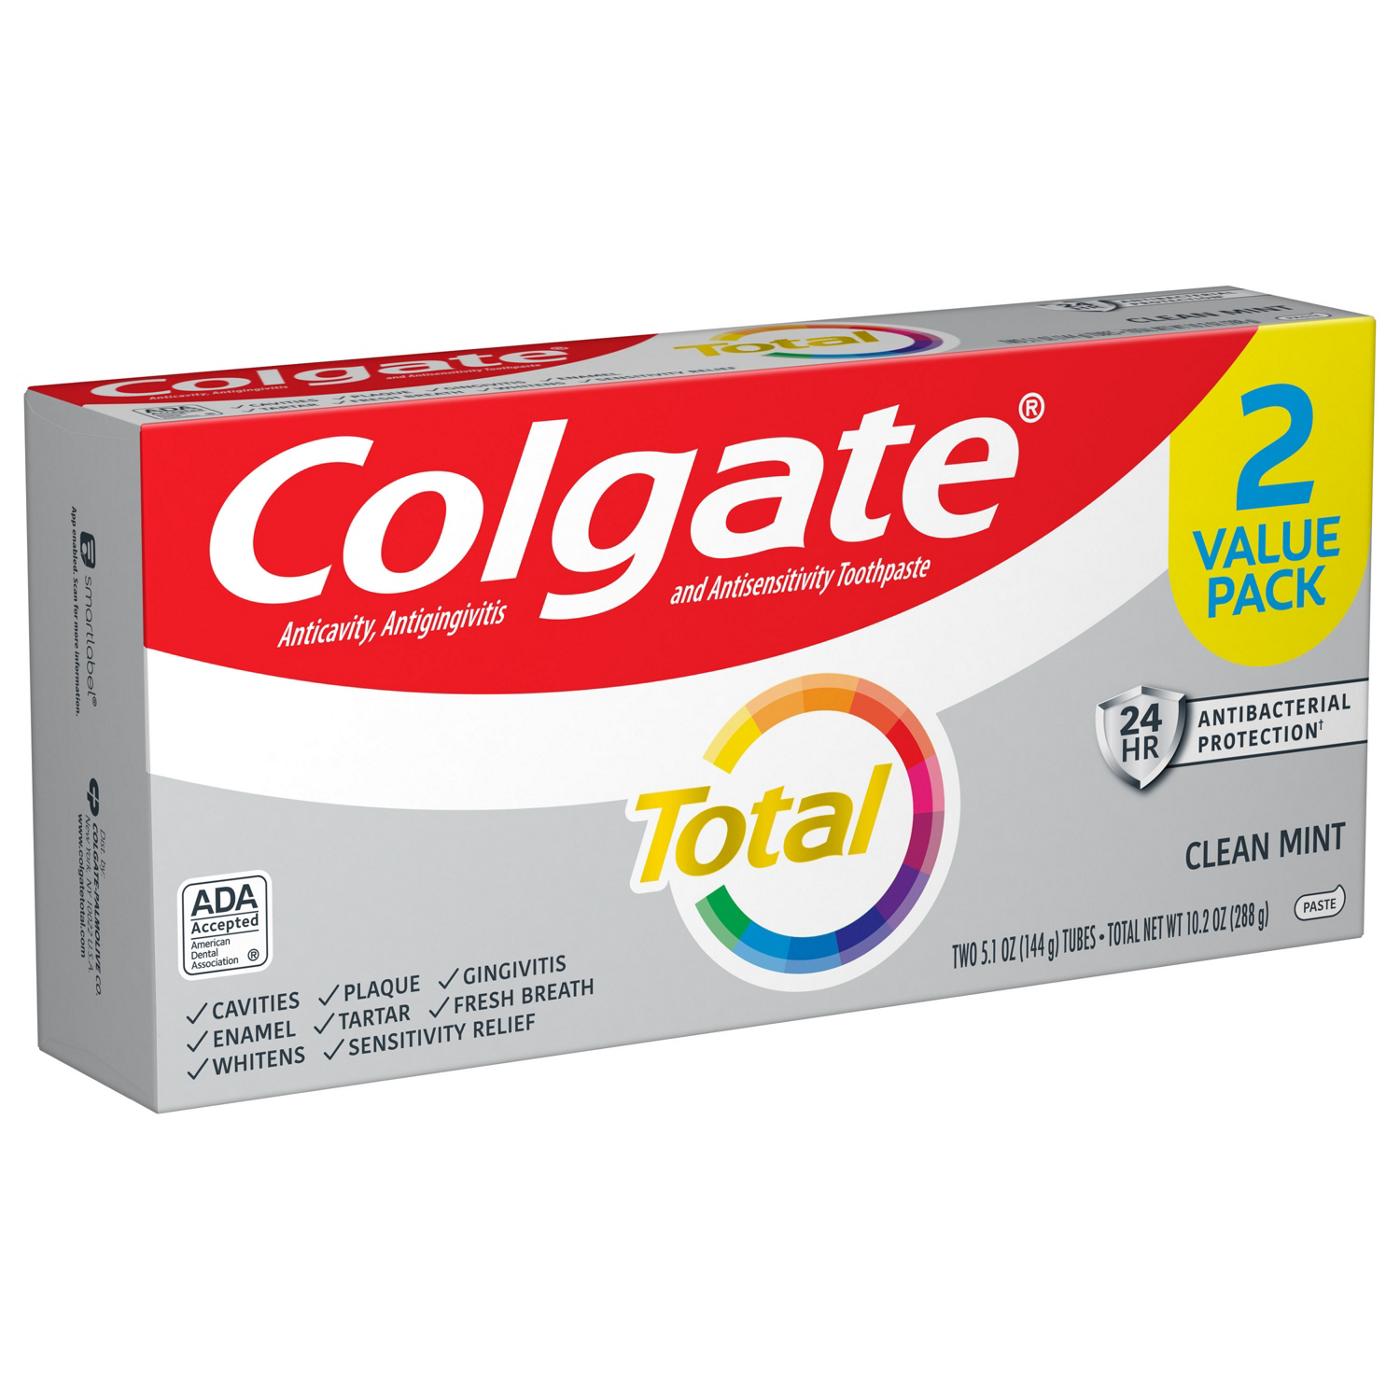 Colgate Total Toothpaste - Clean Mint, 2 Pk; image 17 of 18